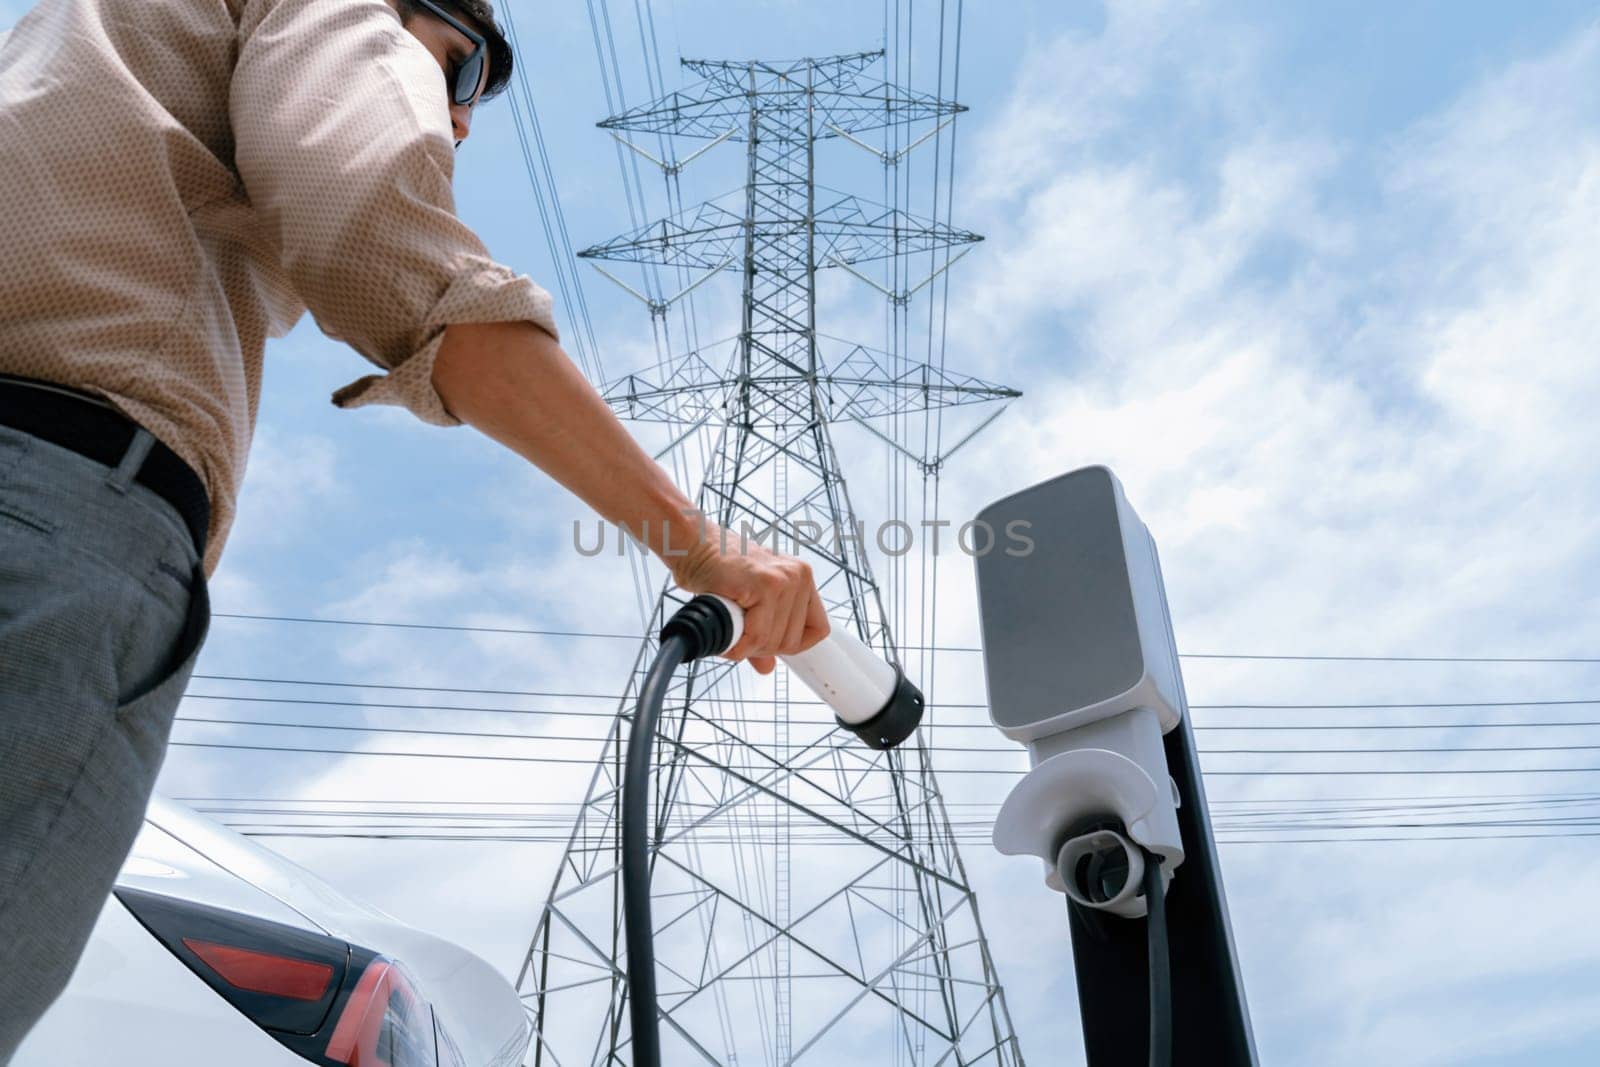 Man recharge EV electric car battery at charging station connected to electrical power grid tower on sky background as electrical industry for eco friendly vehicle utilization. Expedient